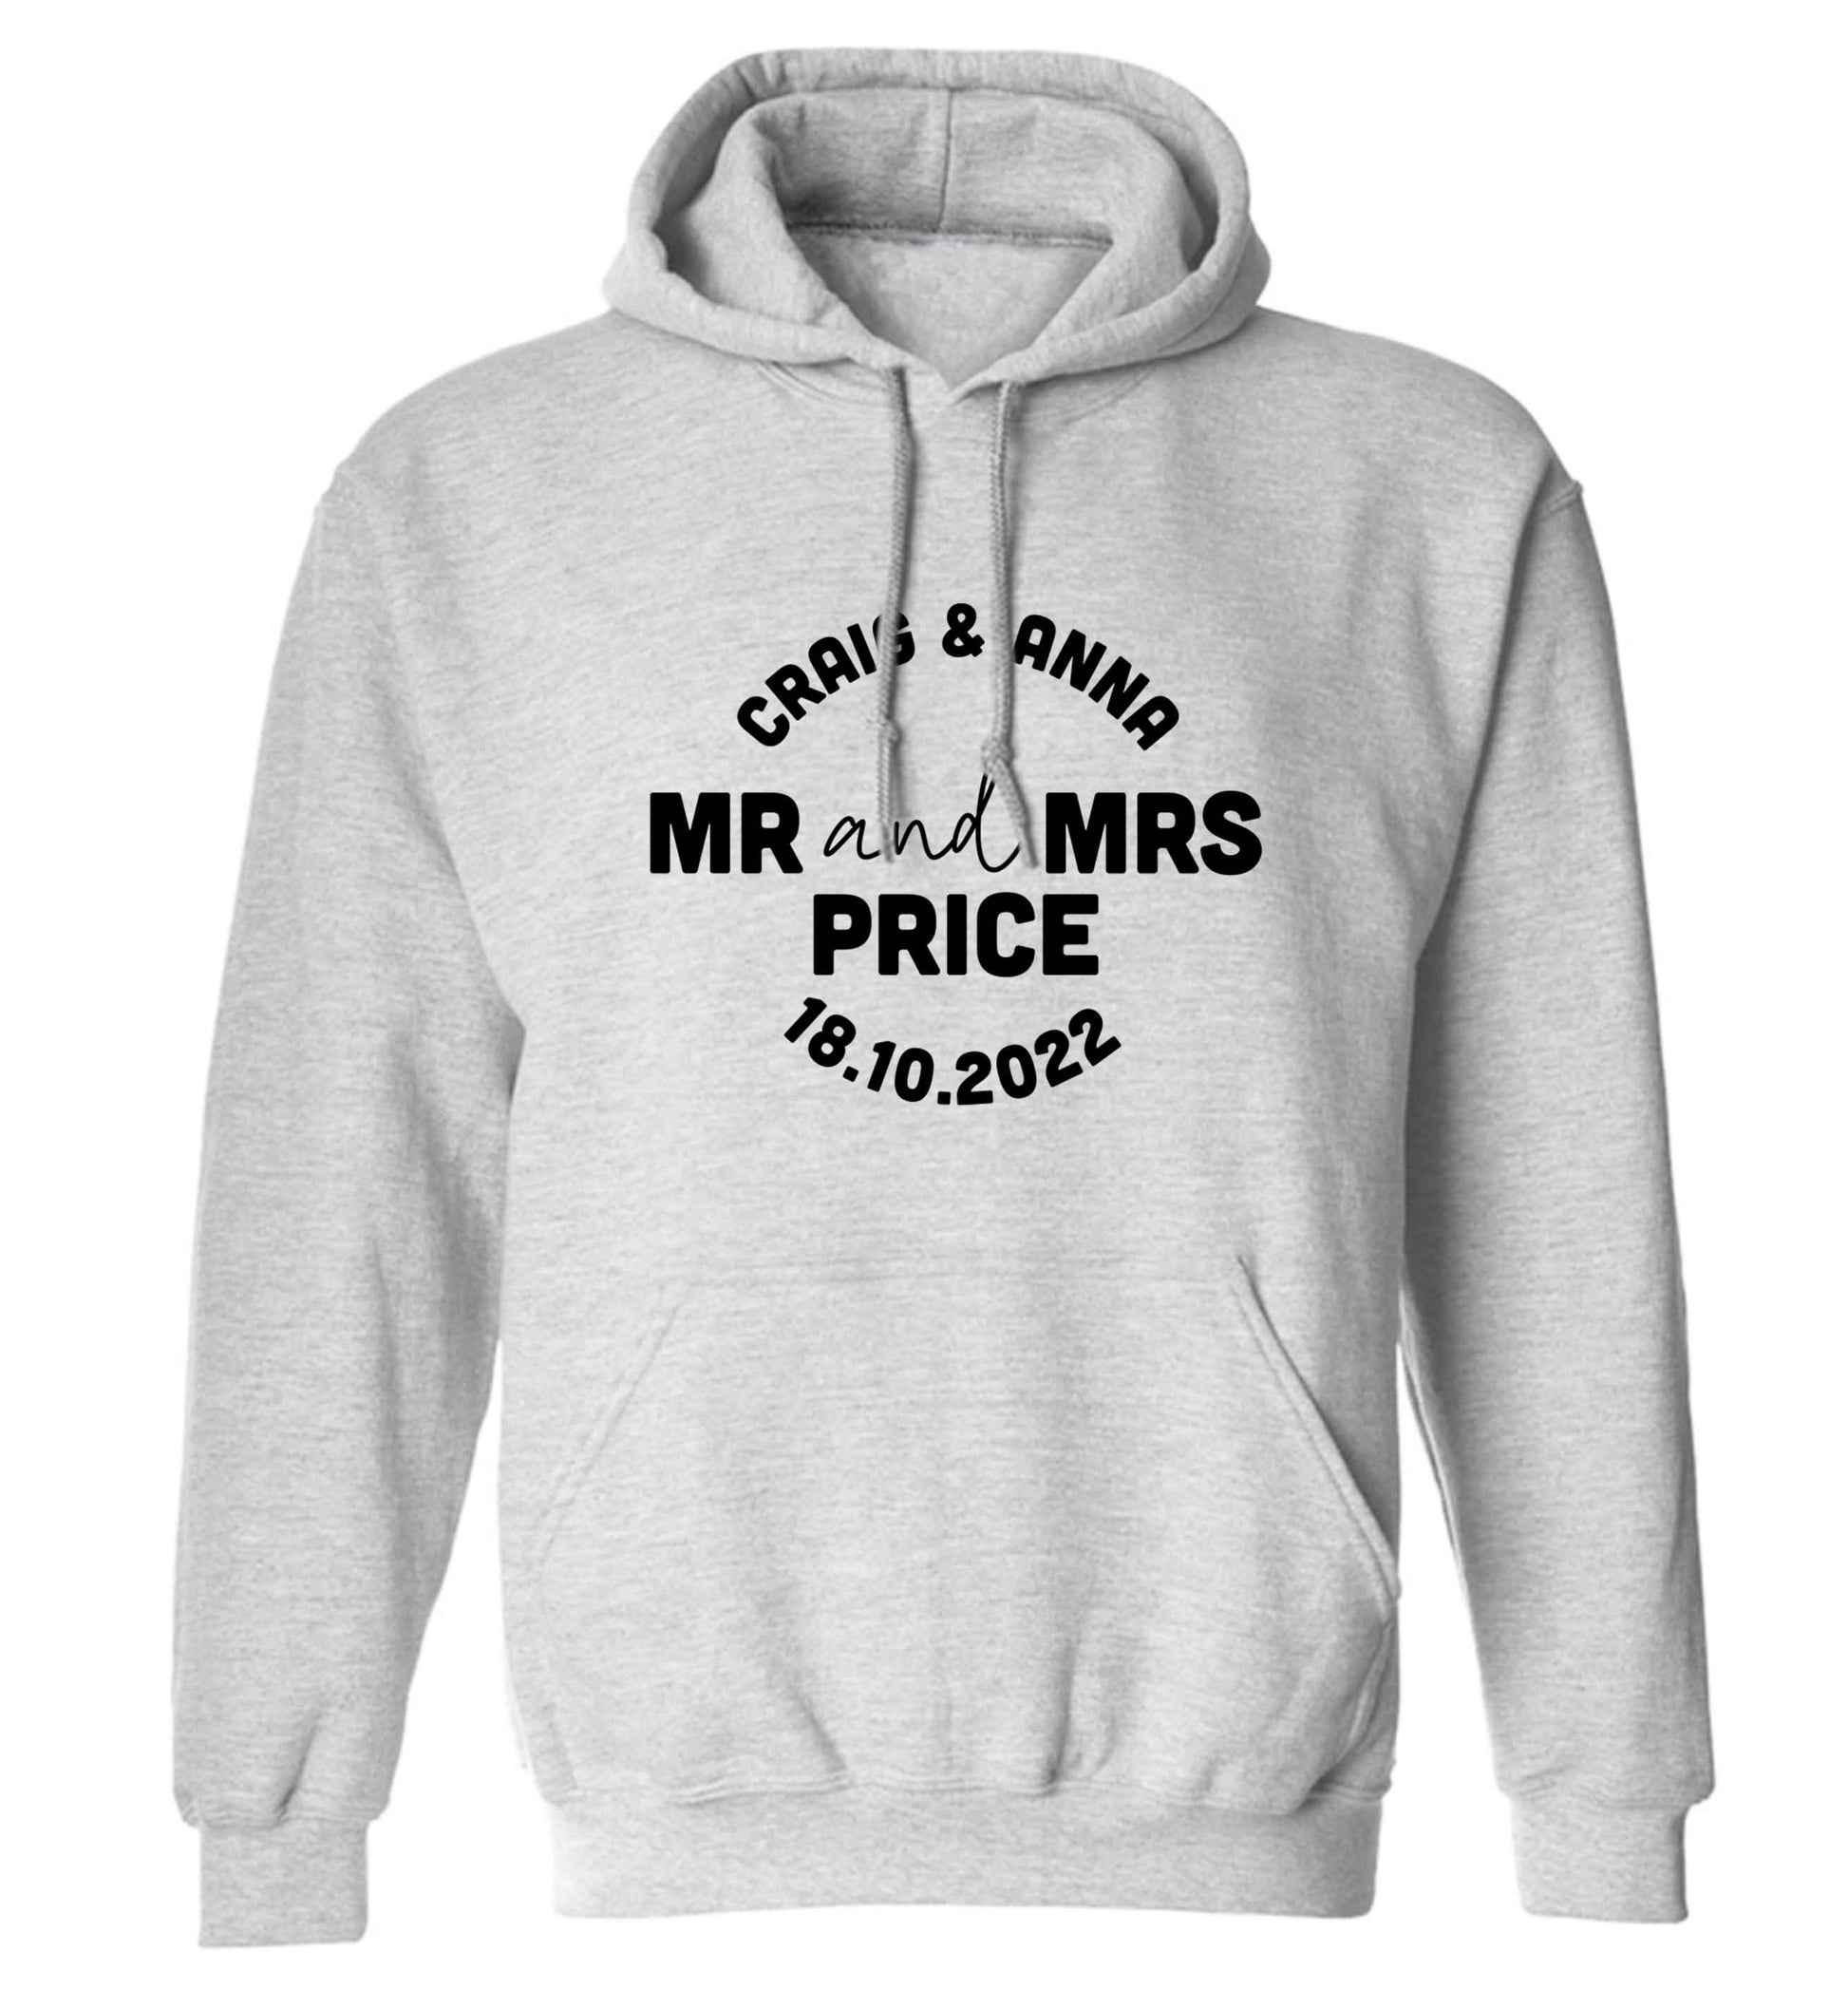 Personalised Mr and Mrs wedding and date! Ideal wedding favours! adults unisex grey hoodie 2XL